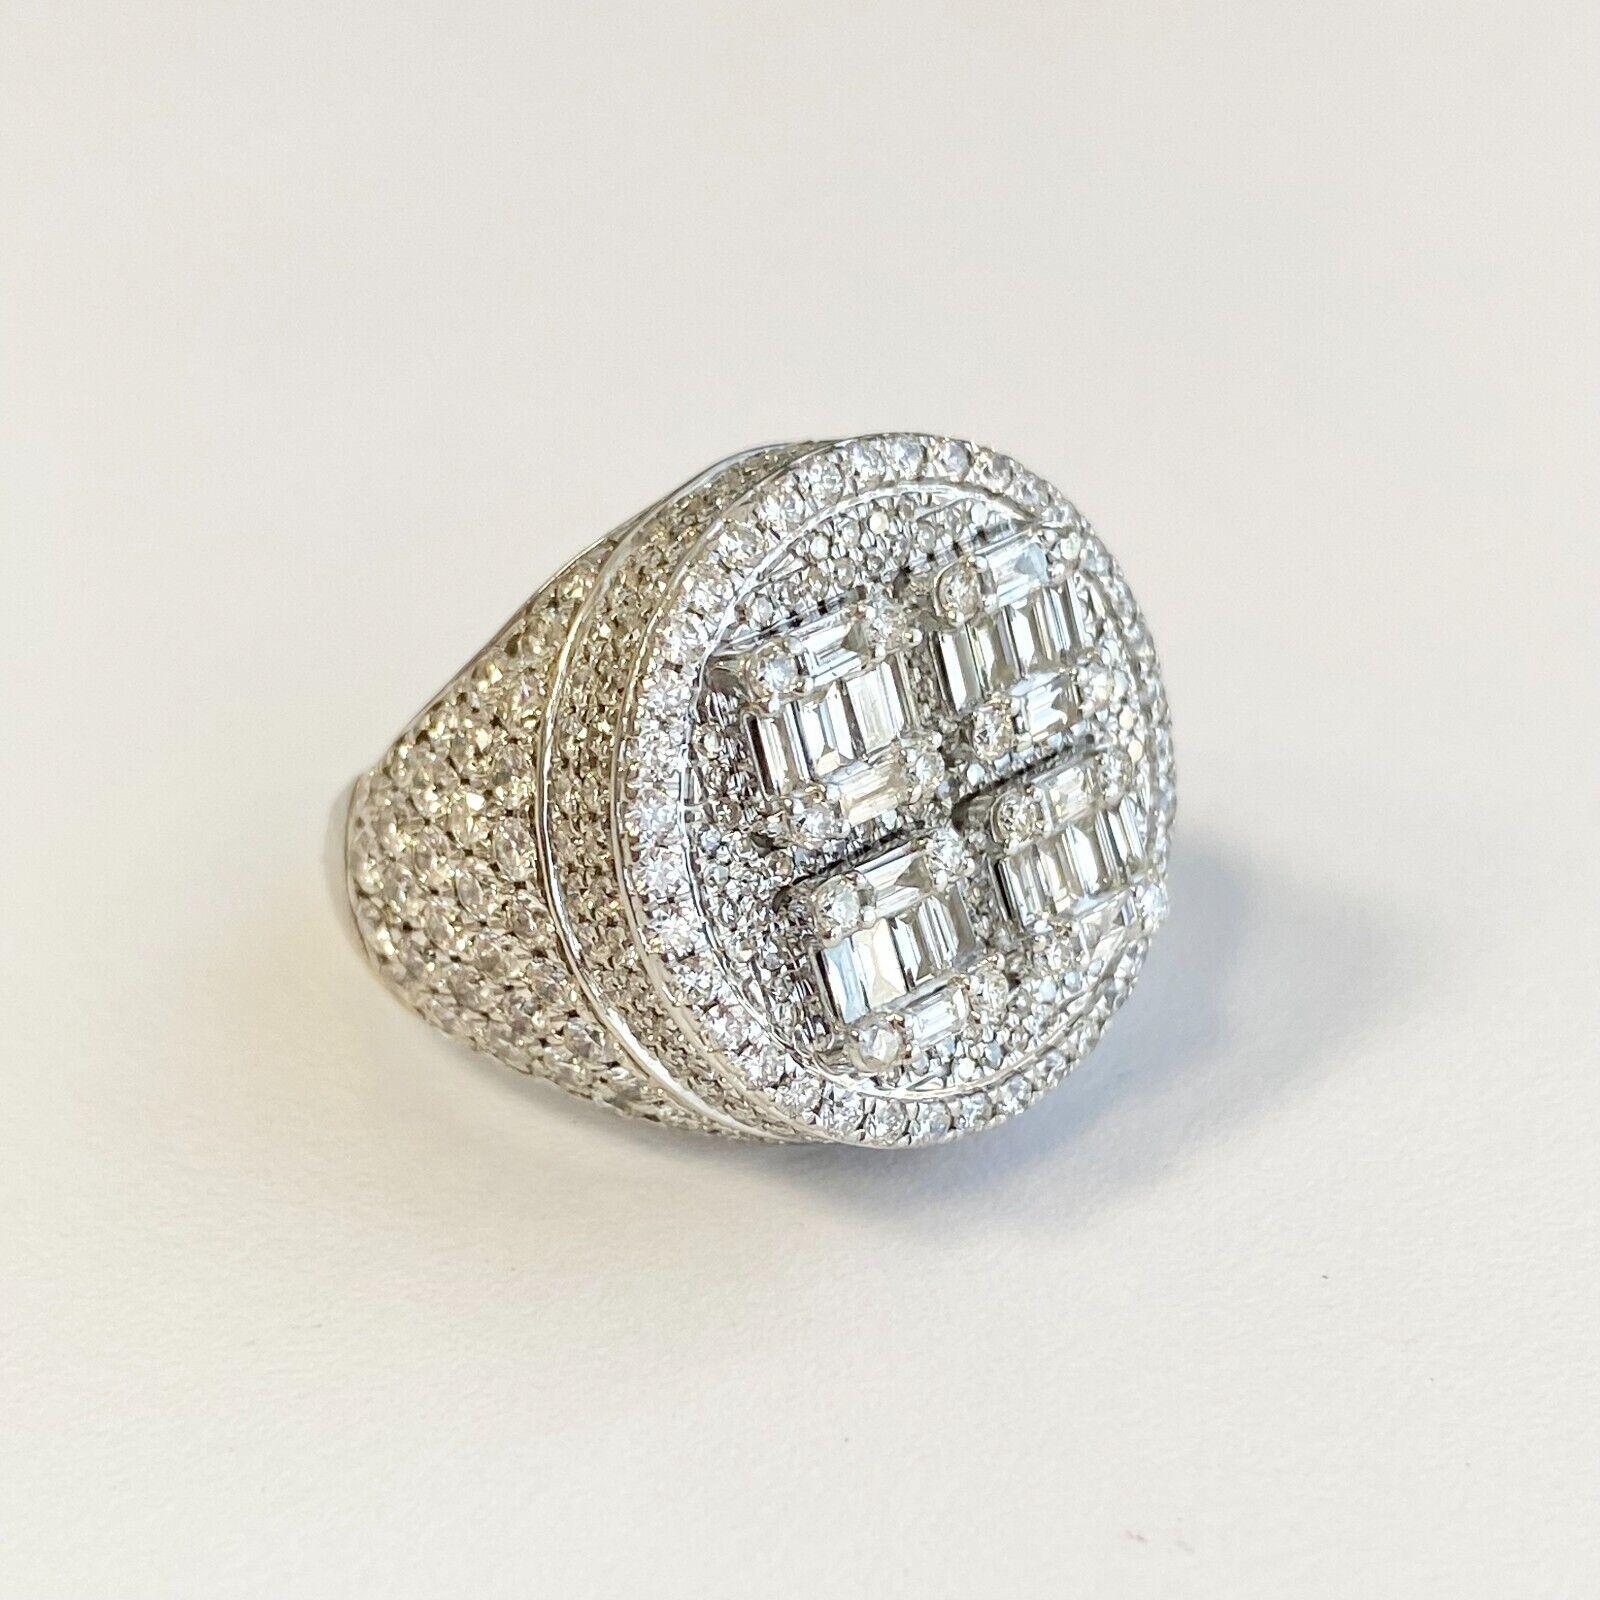 Specifications:
Pre-Owned (Great condition)
Metal: 14K Gold  
Weight: 12.51 Gr
Main Stone: Diamond APPROXIMATELY 4CTTW
Color: G
Clarity: VS-SI1
Size: 7.5US
